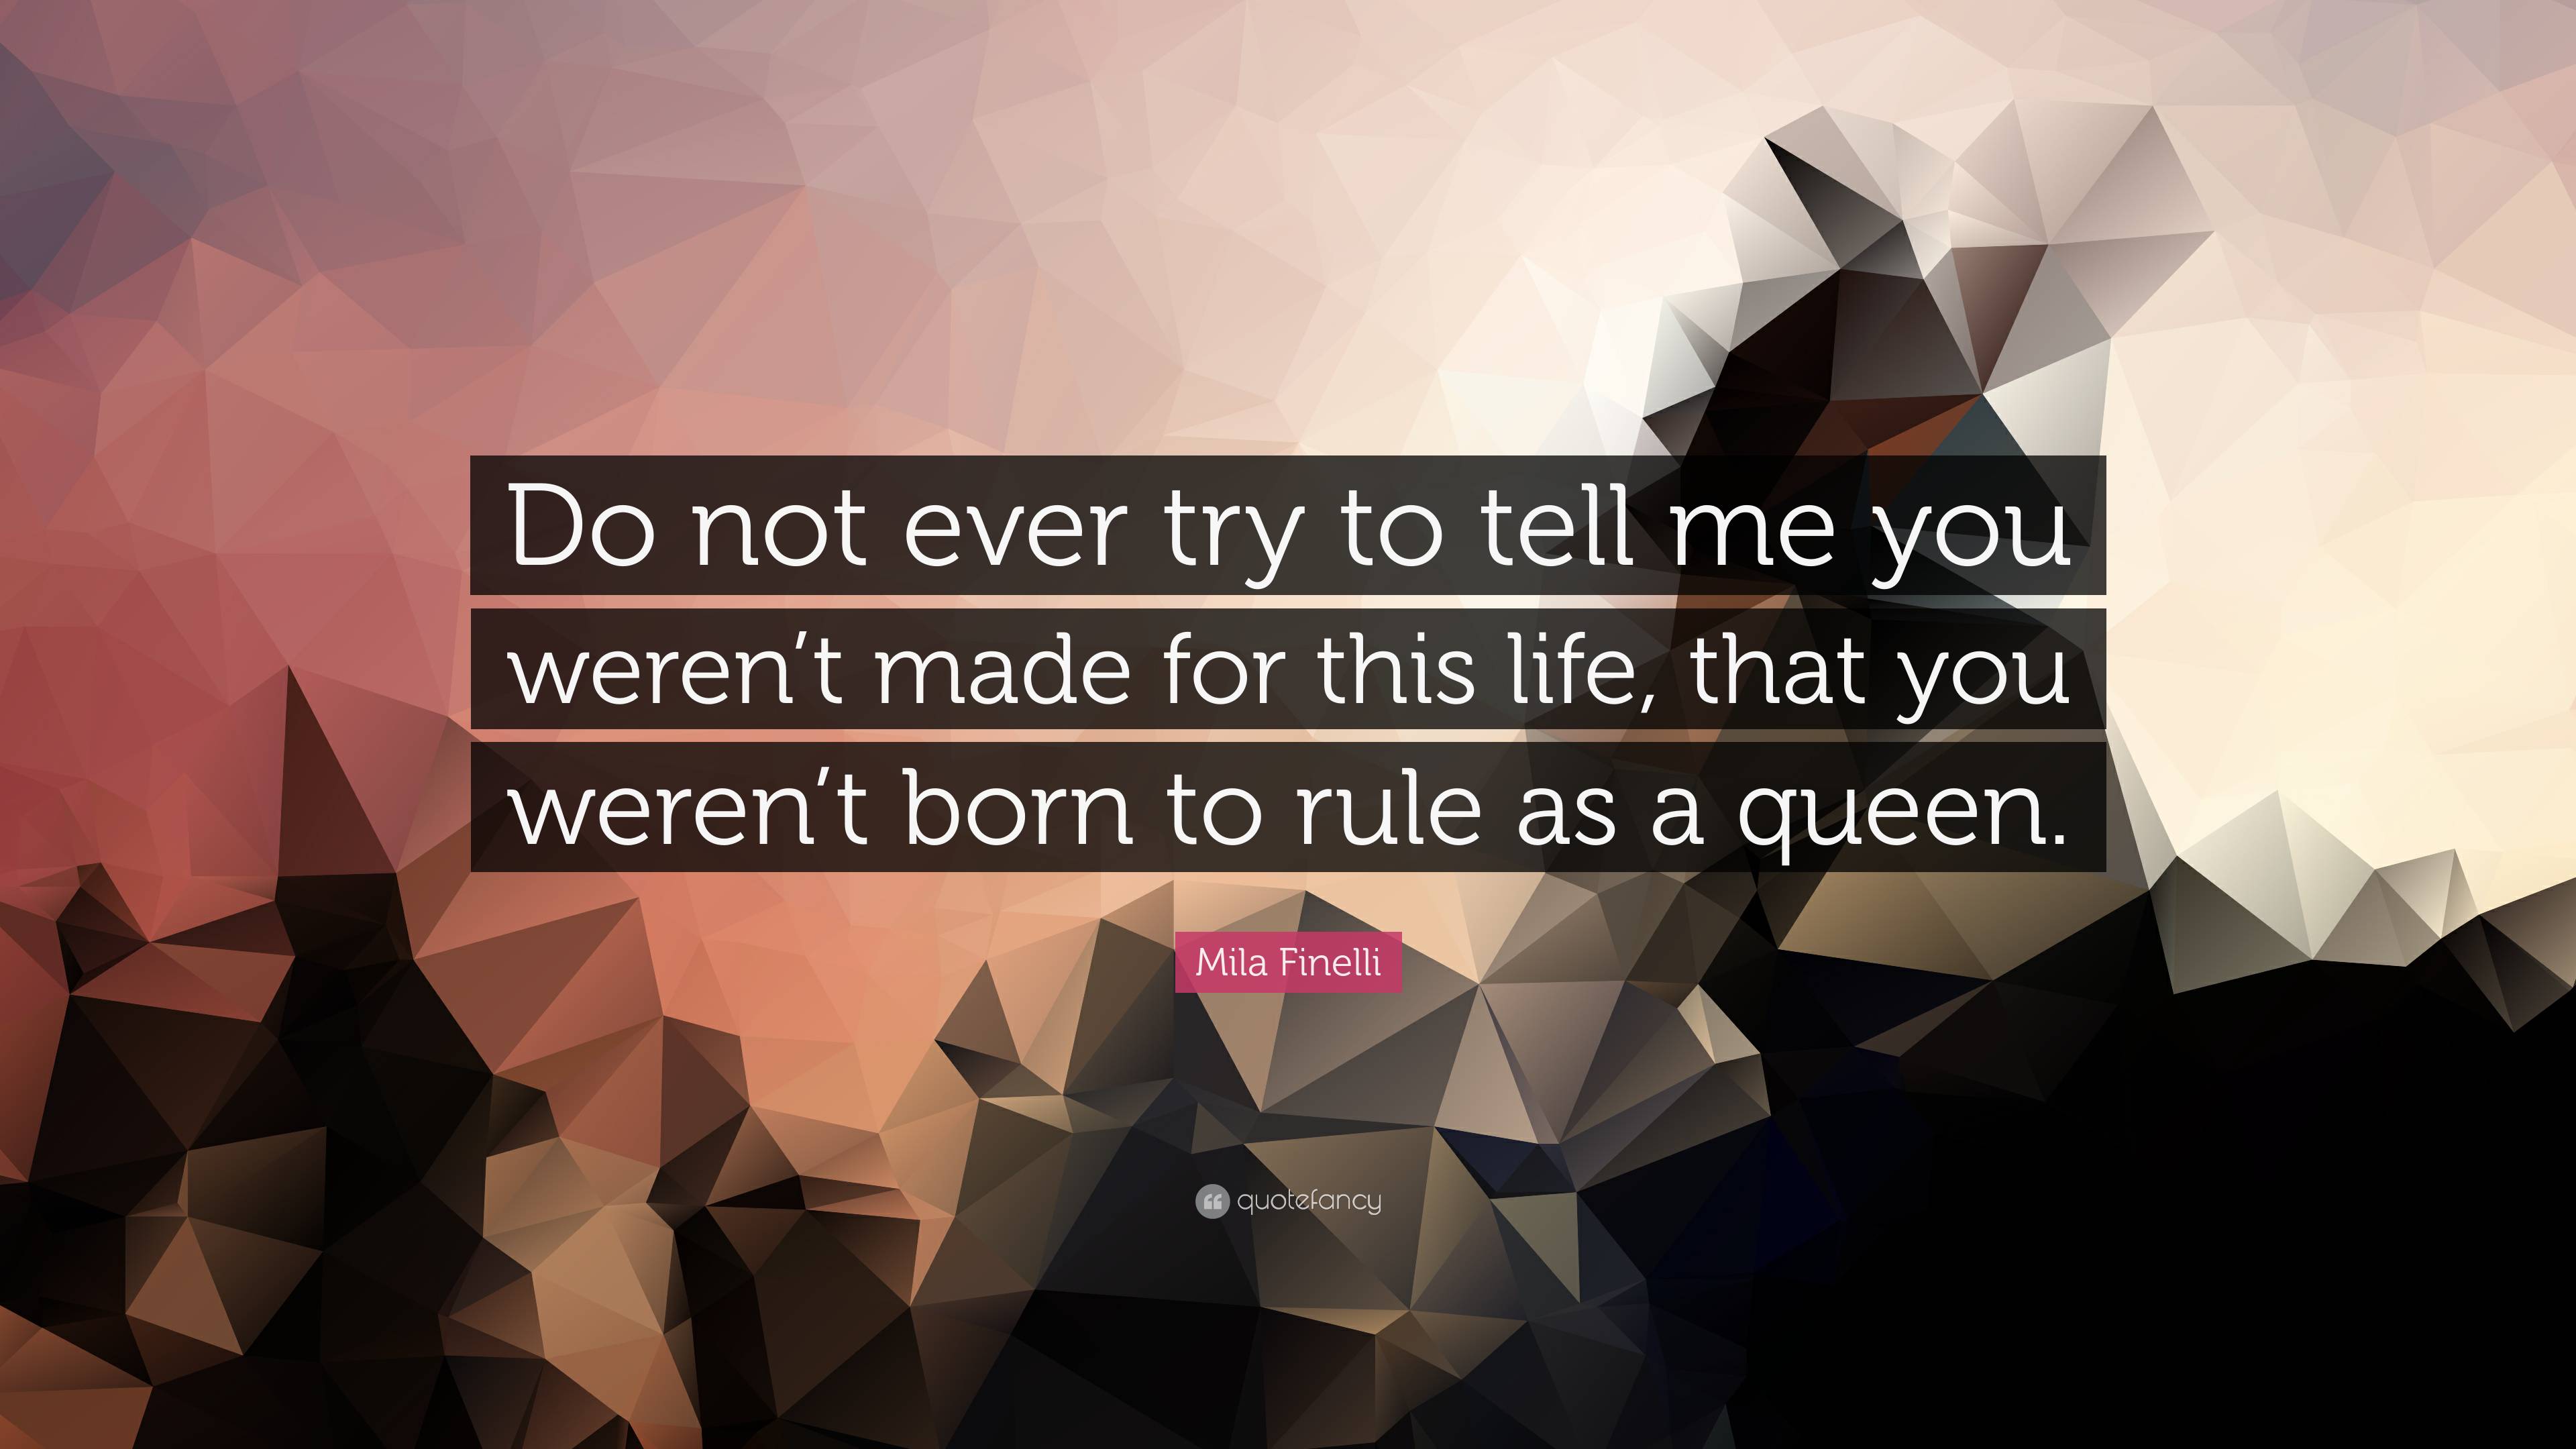 Mila Finelli Quote: “Do not ever try to tell me you weren’t made for ...